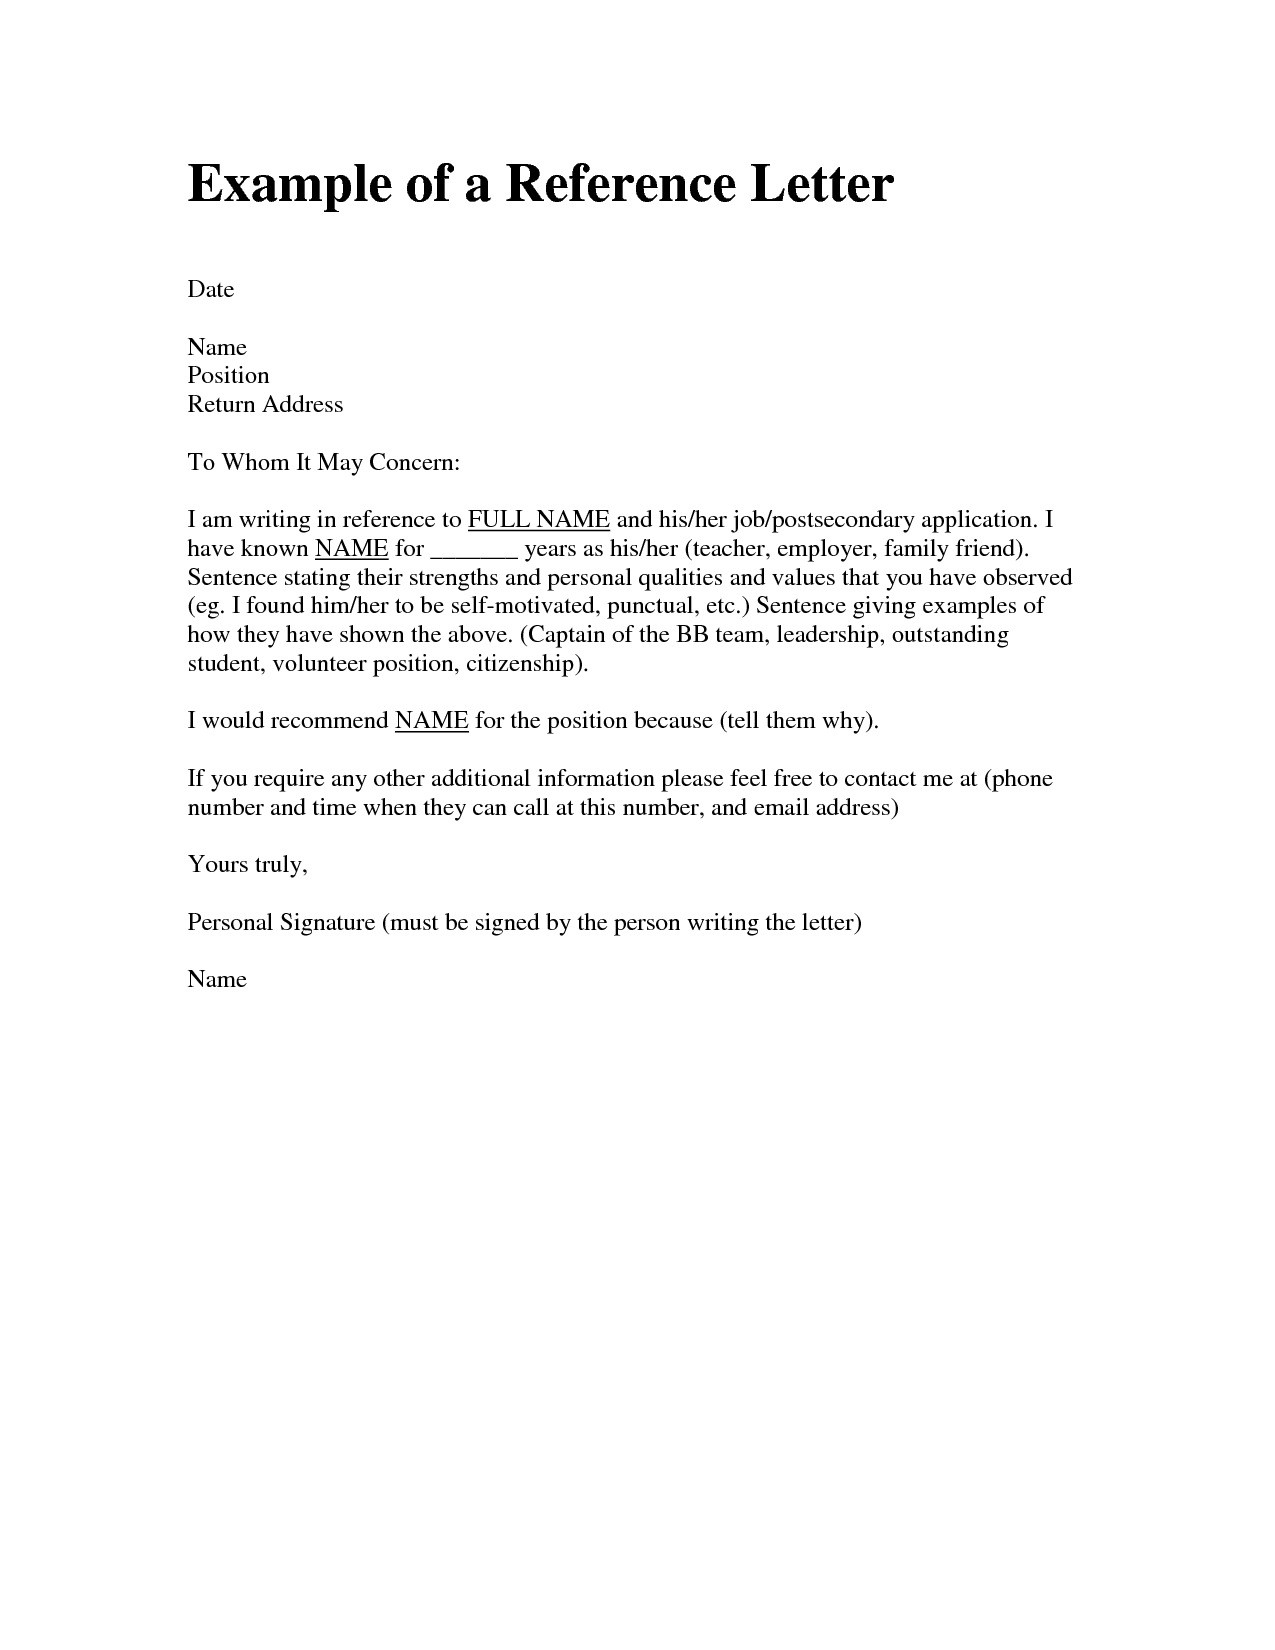 Letter Of Recommendation for A Friend Template - Example Personal Re Mendation Letter for Job Best Re Mendation